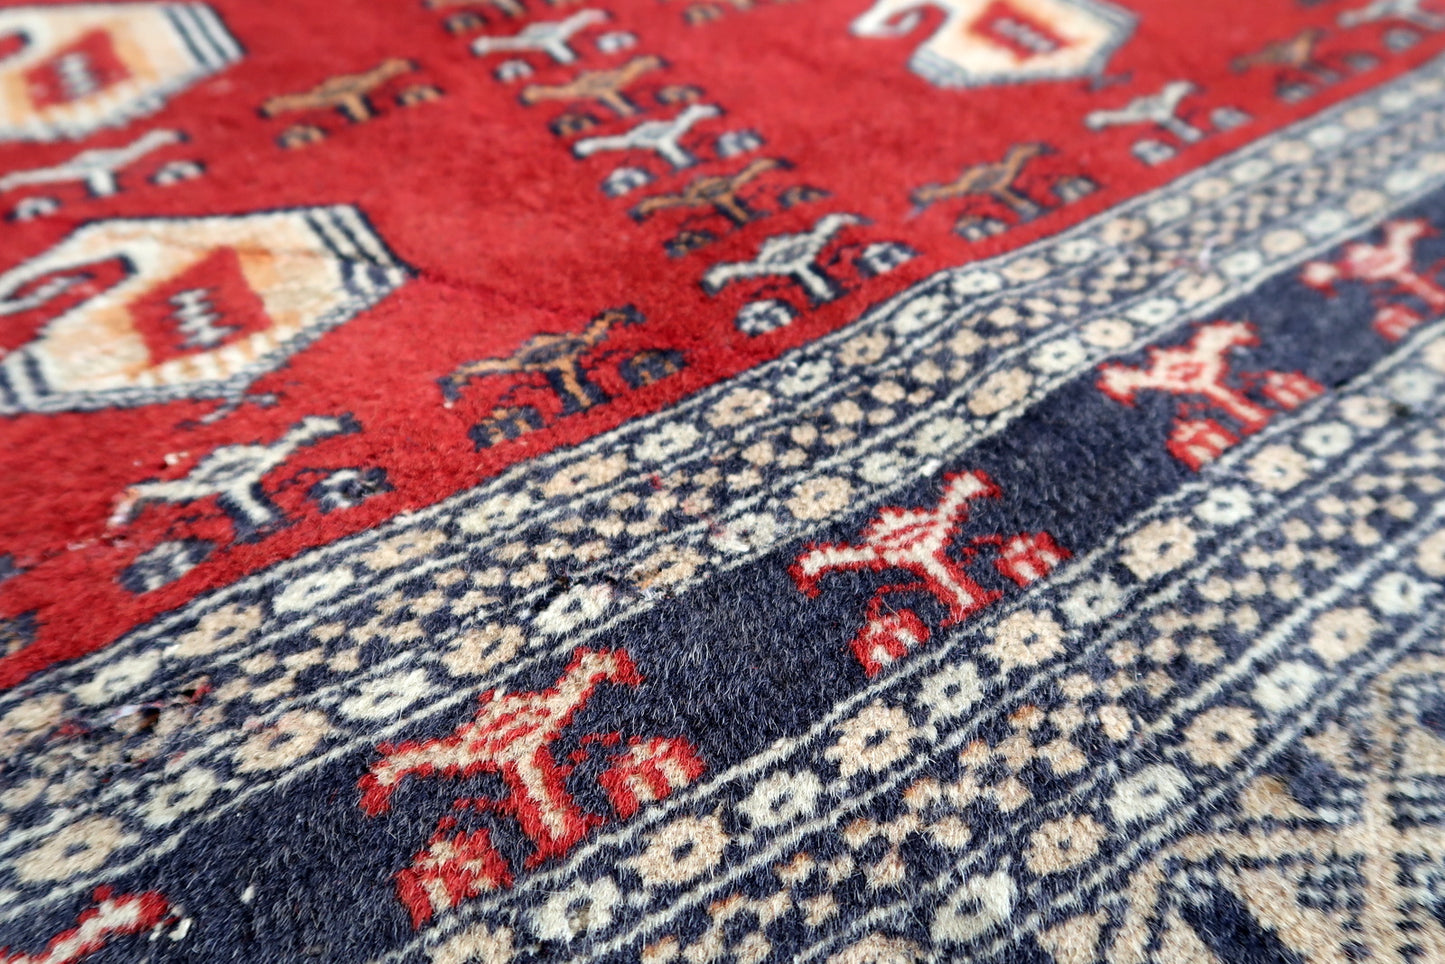 Handmade vintage Uzbek Bukhara rug in red color. The rug has been made in wool in the middle of 20th century. It is in original condition, it has some low pile.